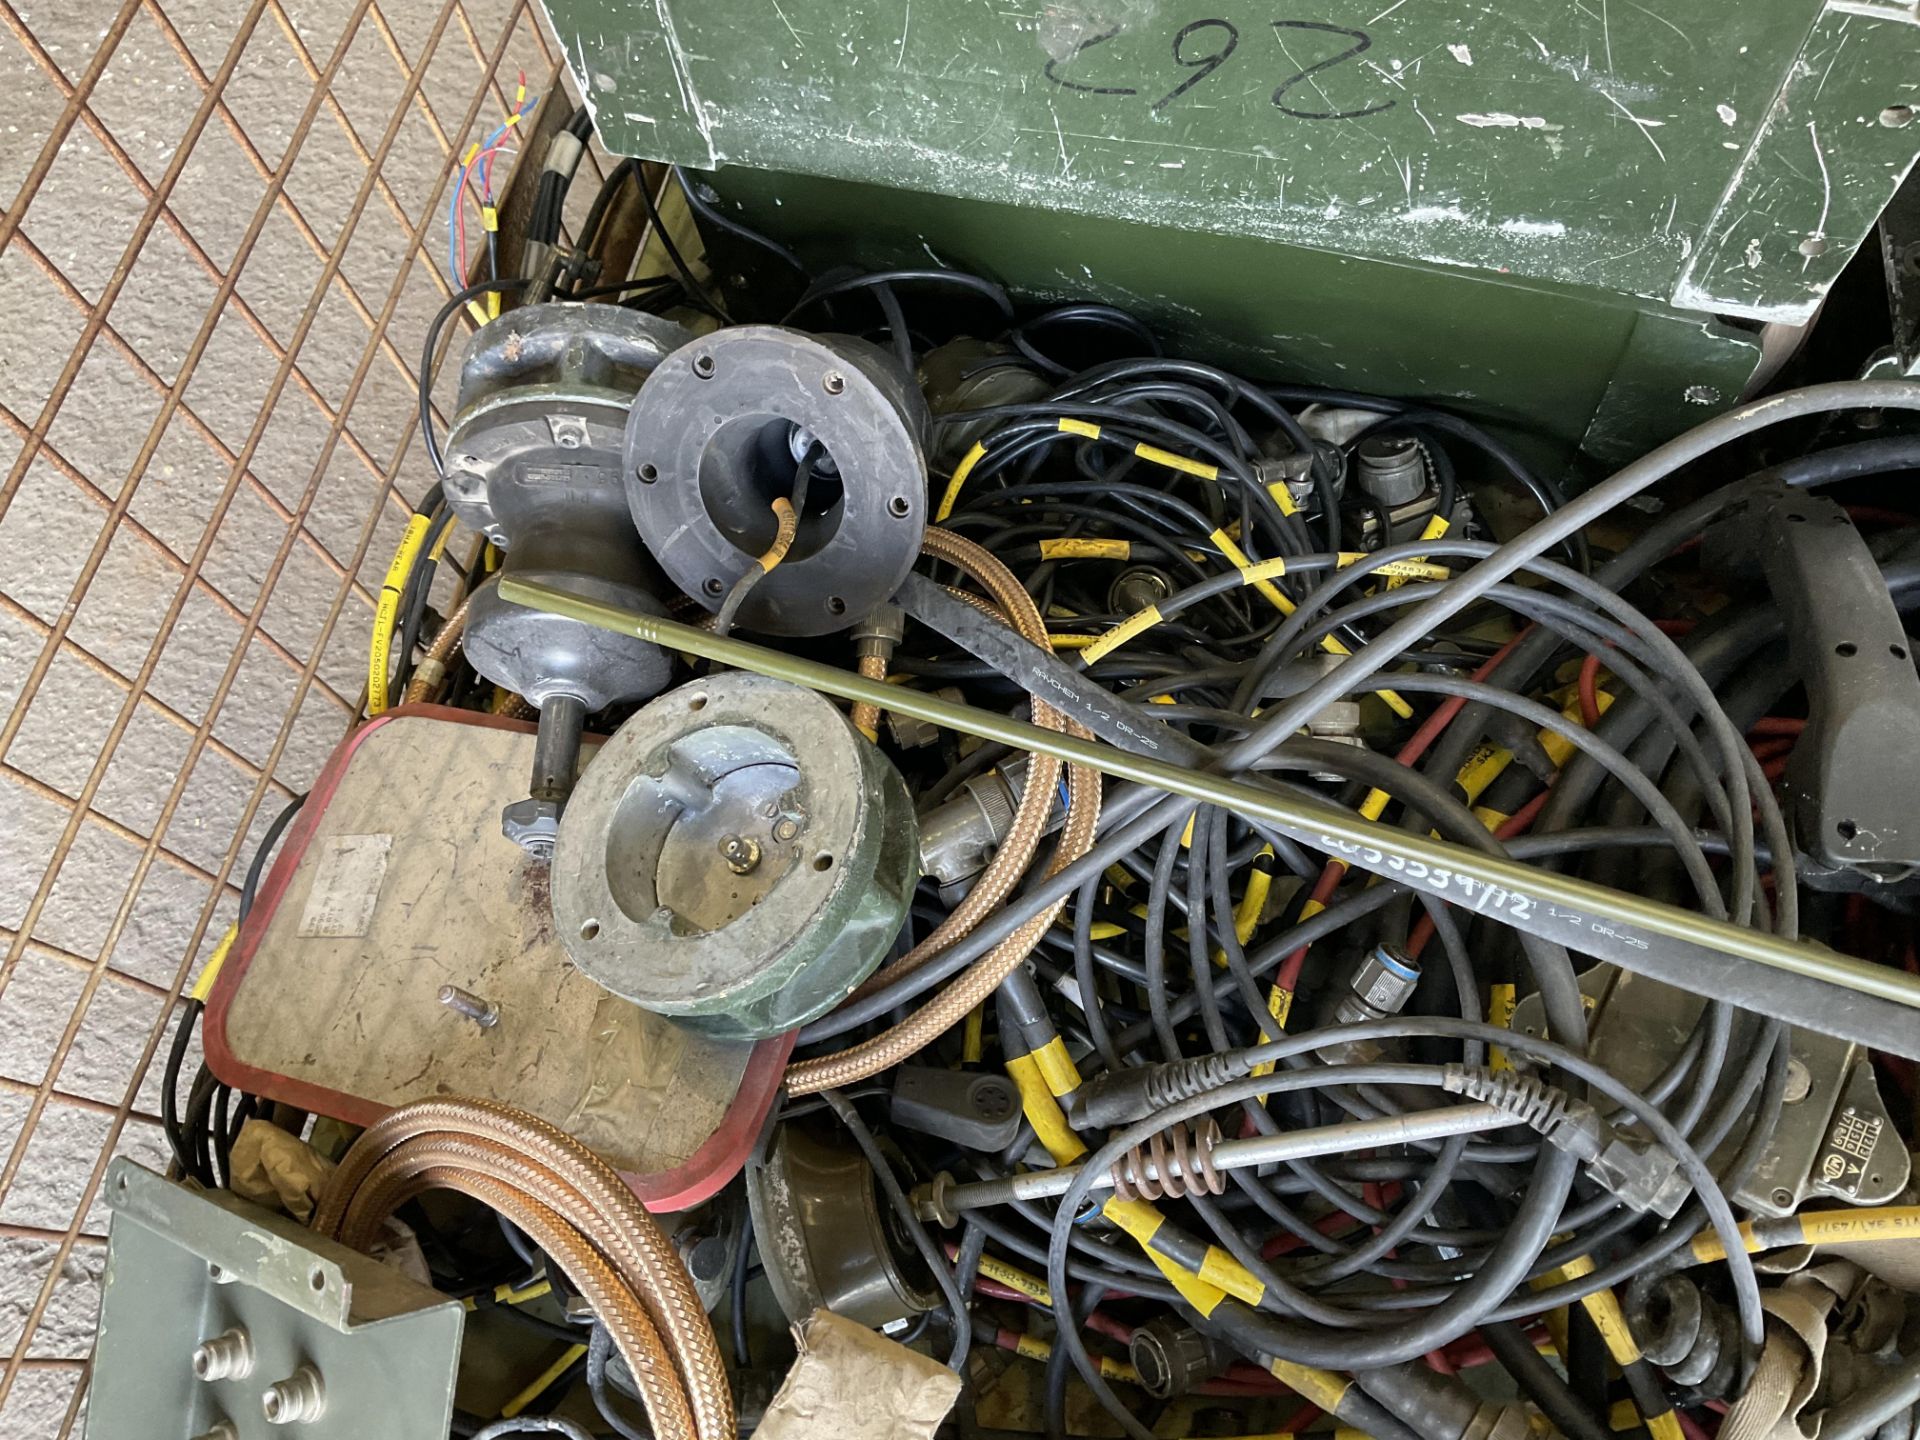 1X STILLAGE OF CLANSMAN RADIO EQUIPMENT INCLUDING CABLES, REBROADCAST BOXES, HEADSETS, ANTENNAS, ETC - Image 5 of 5